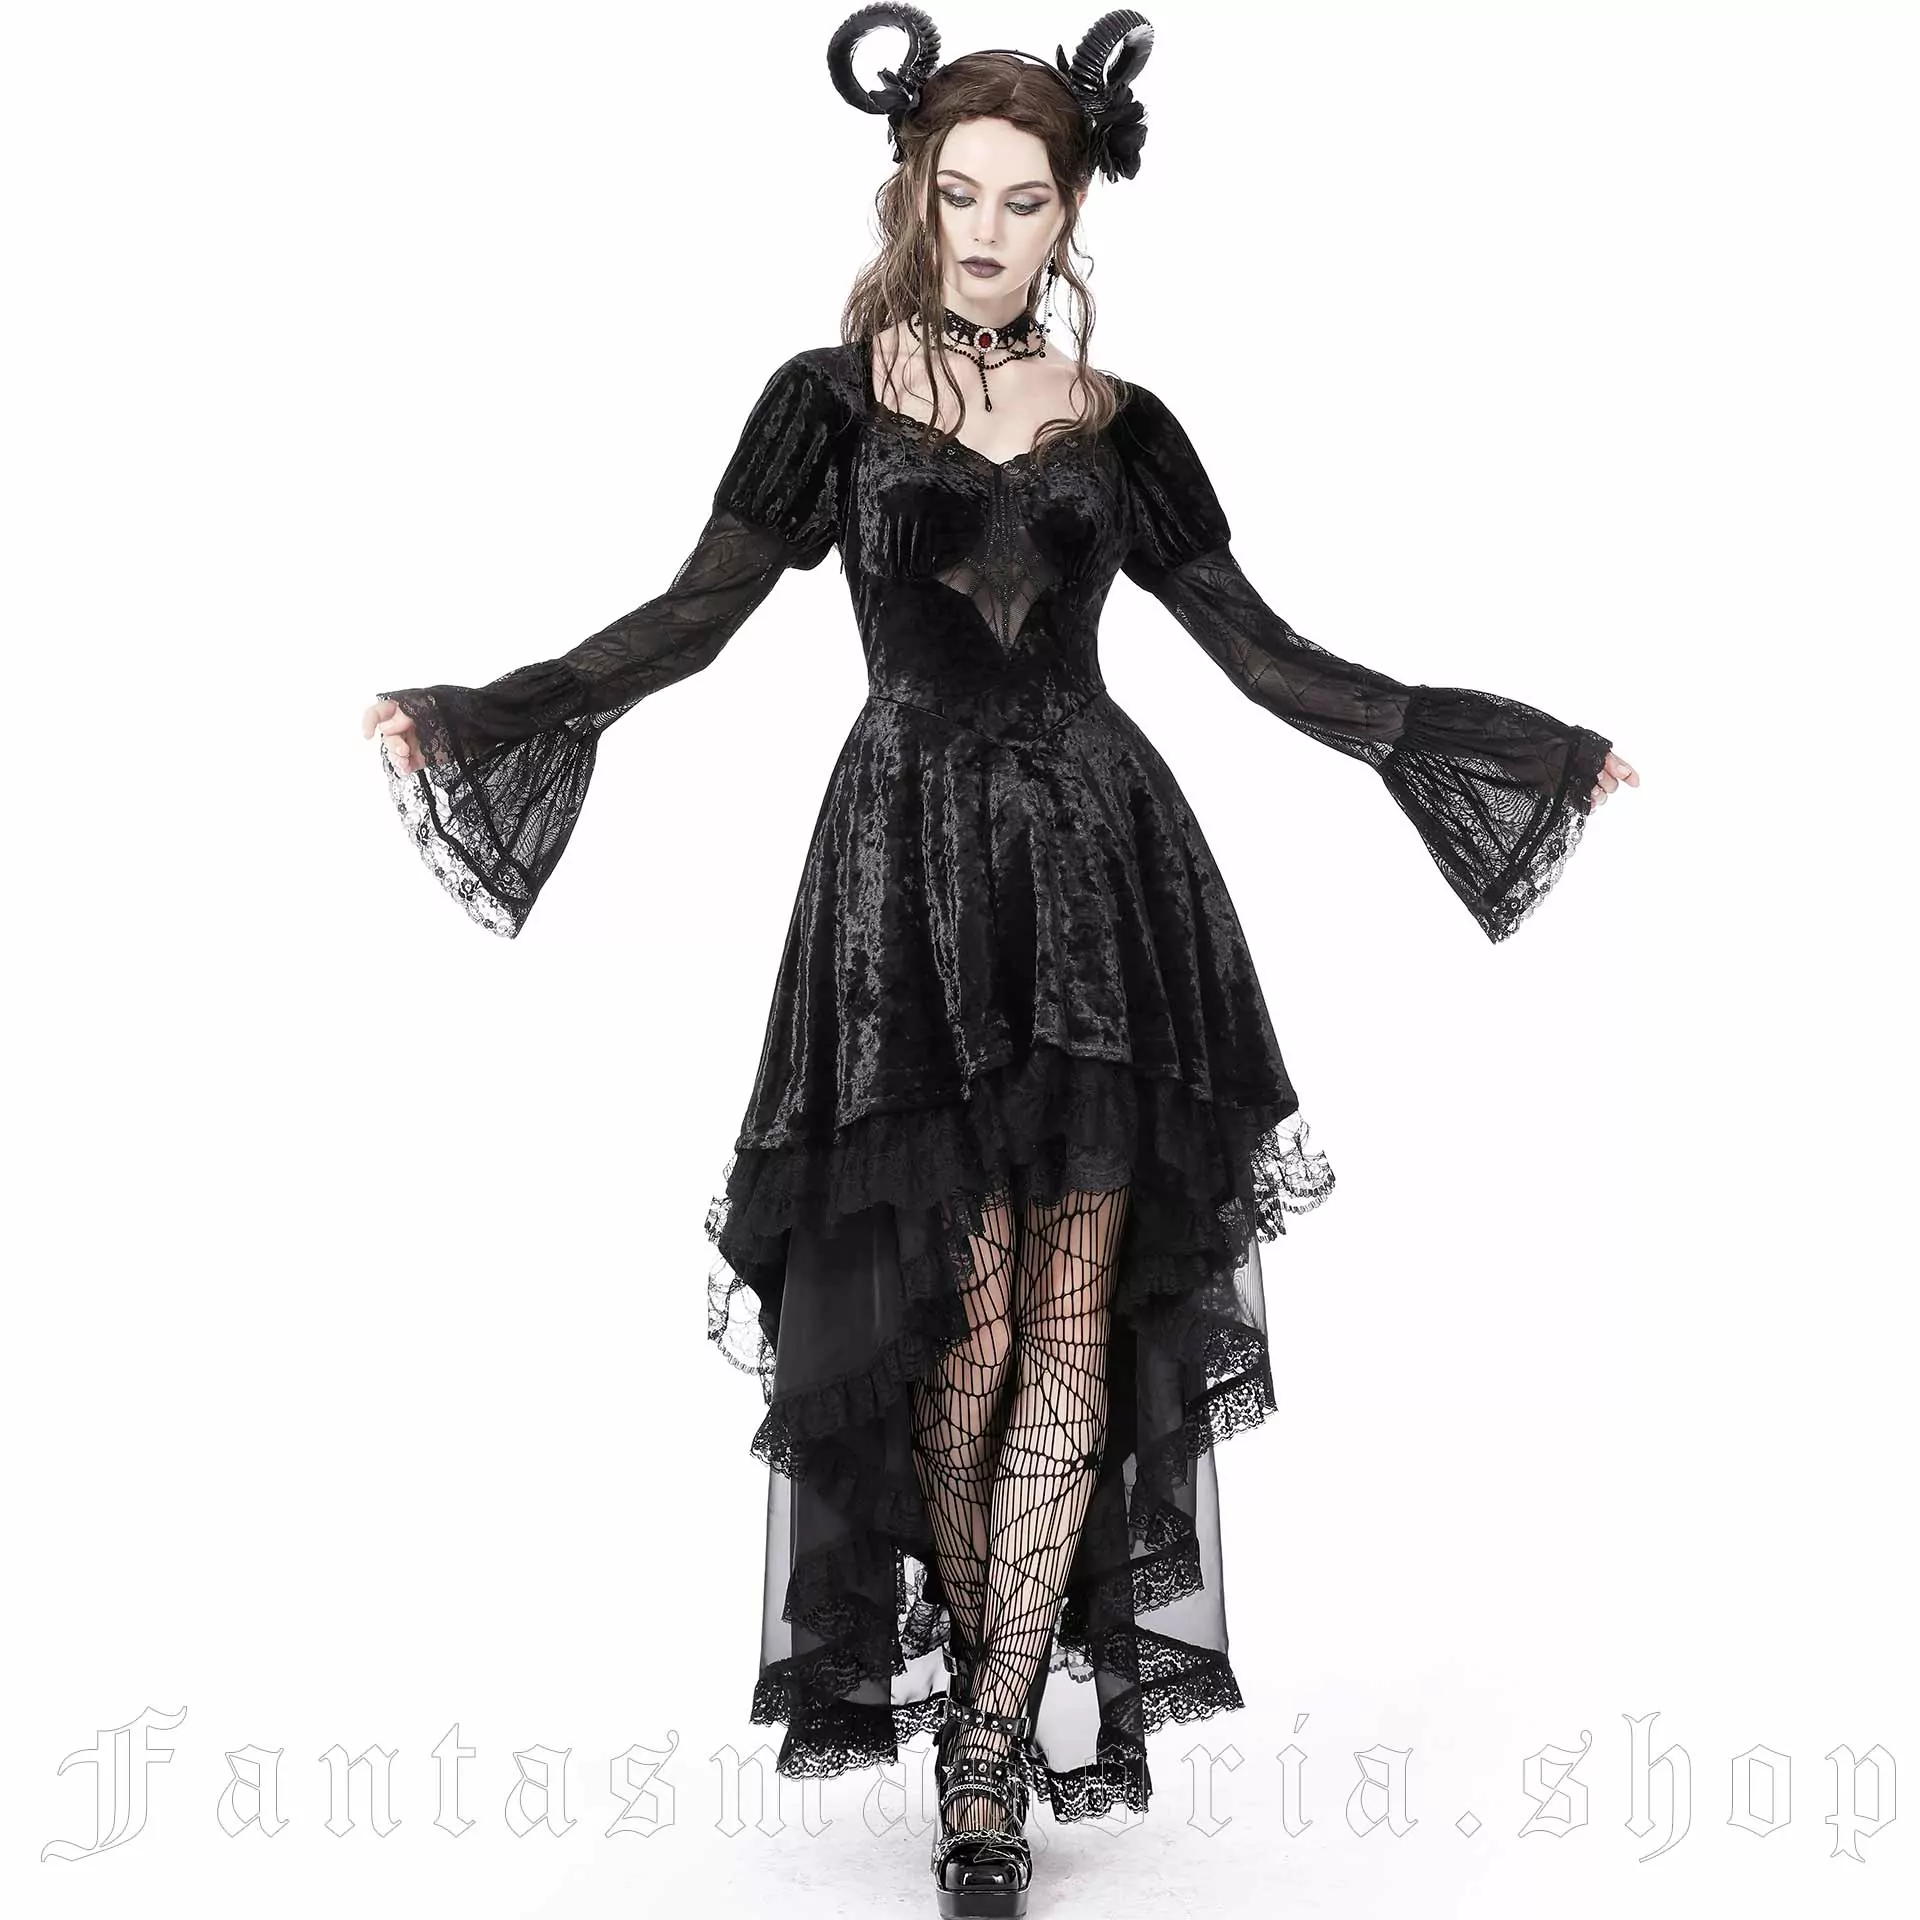 Body Suit Stretch Spiderweb on Black Lace Goth Wiccan Halloween